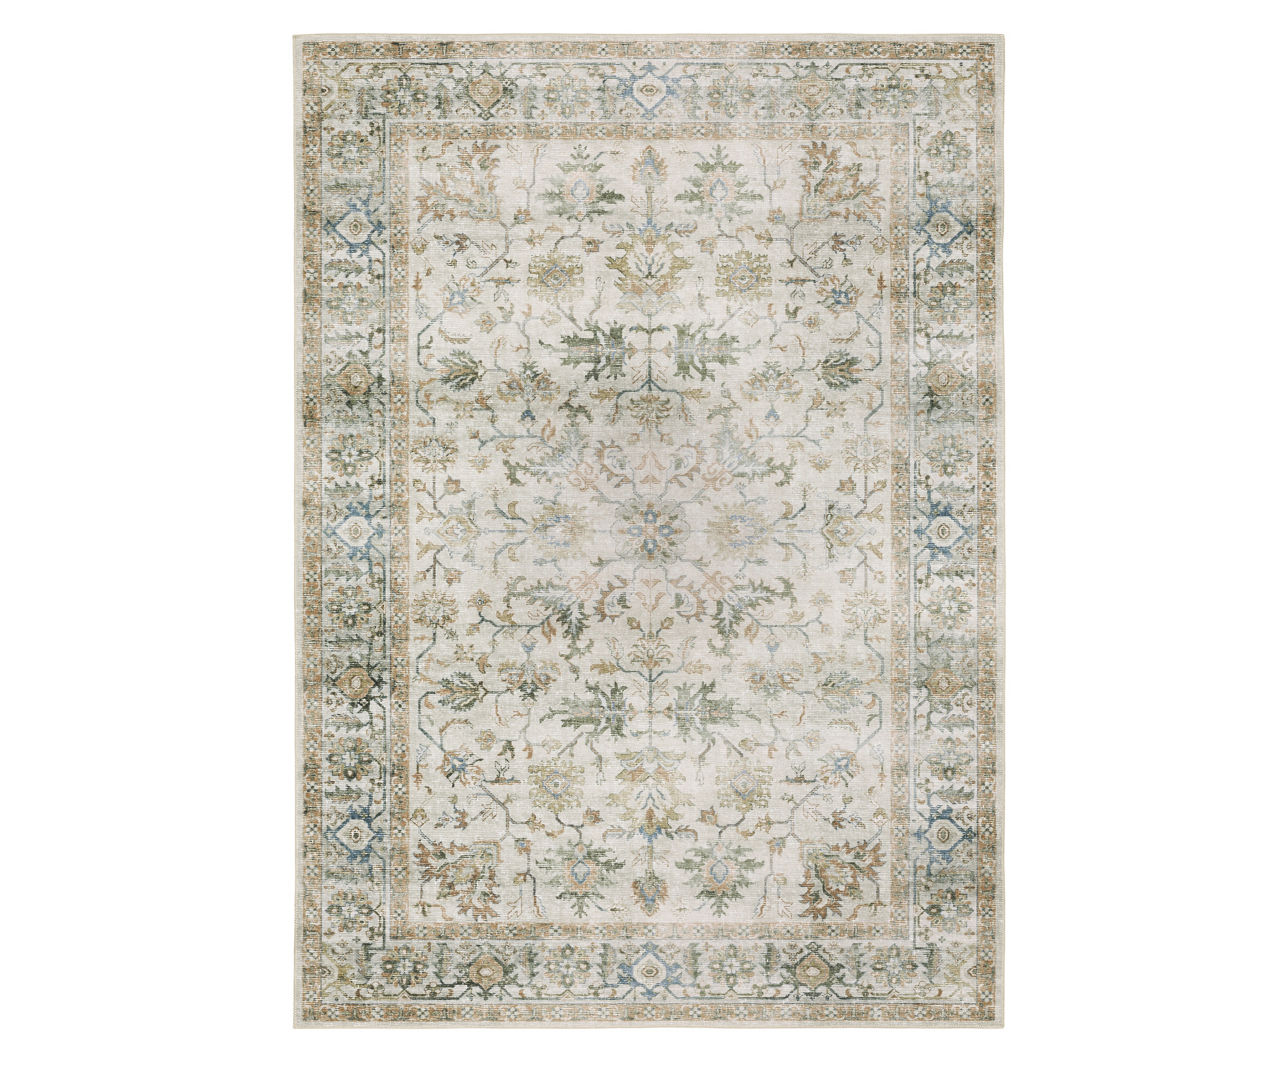 Chalkley Ivory & Green Floral Area Rug, (3.6' x 5.6')